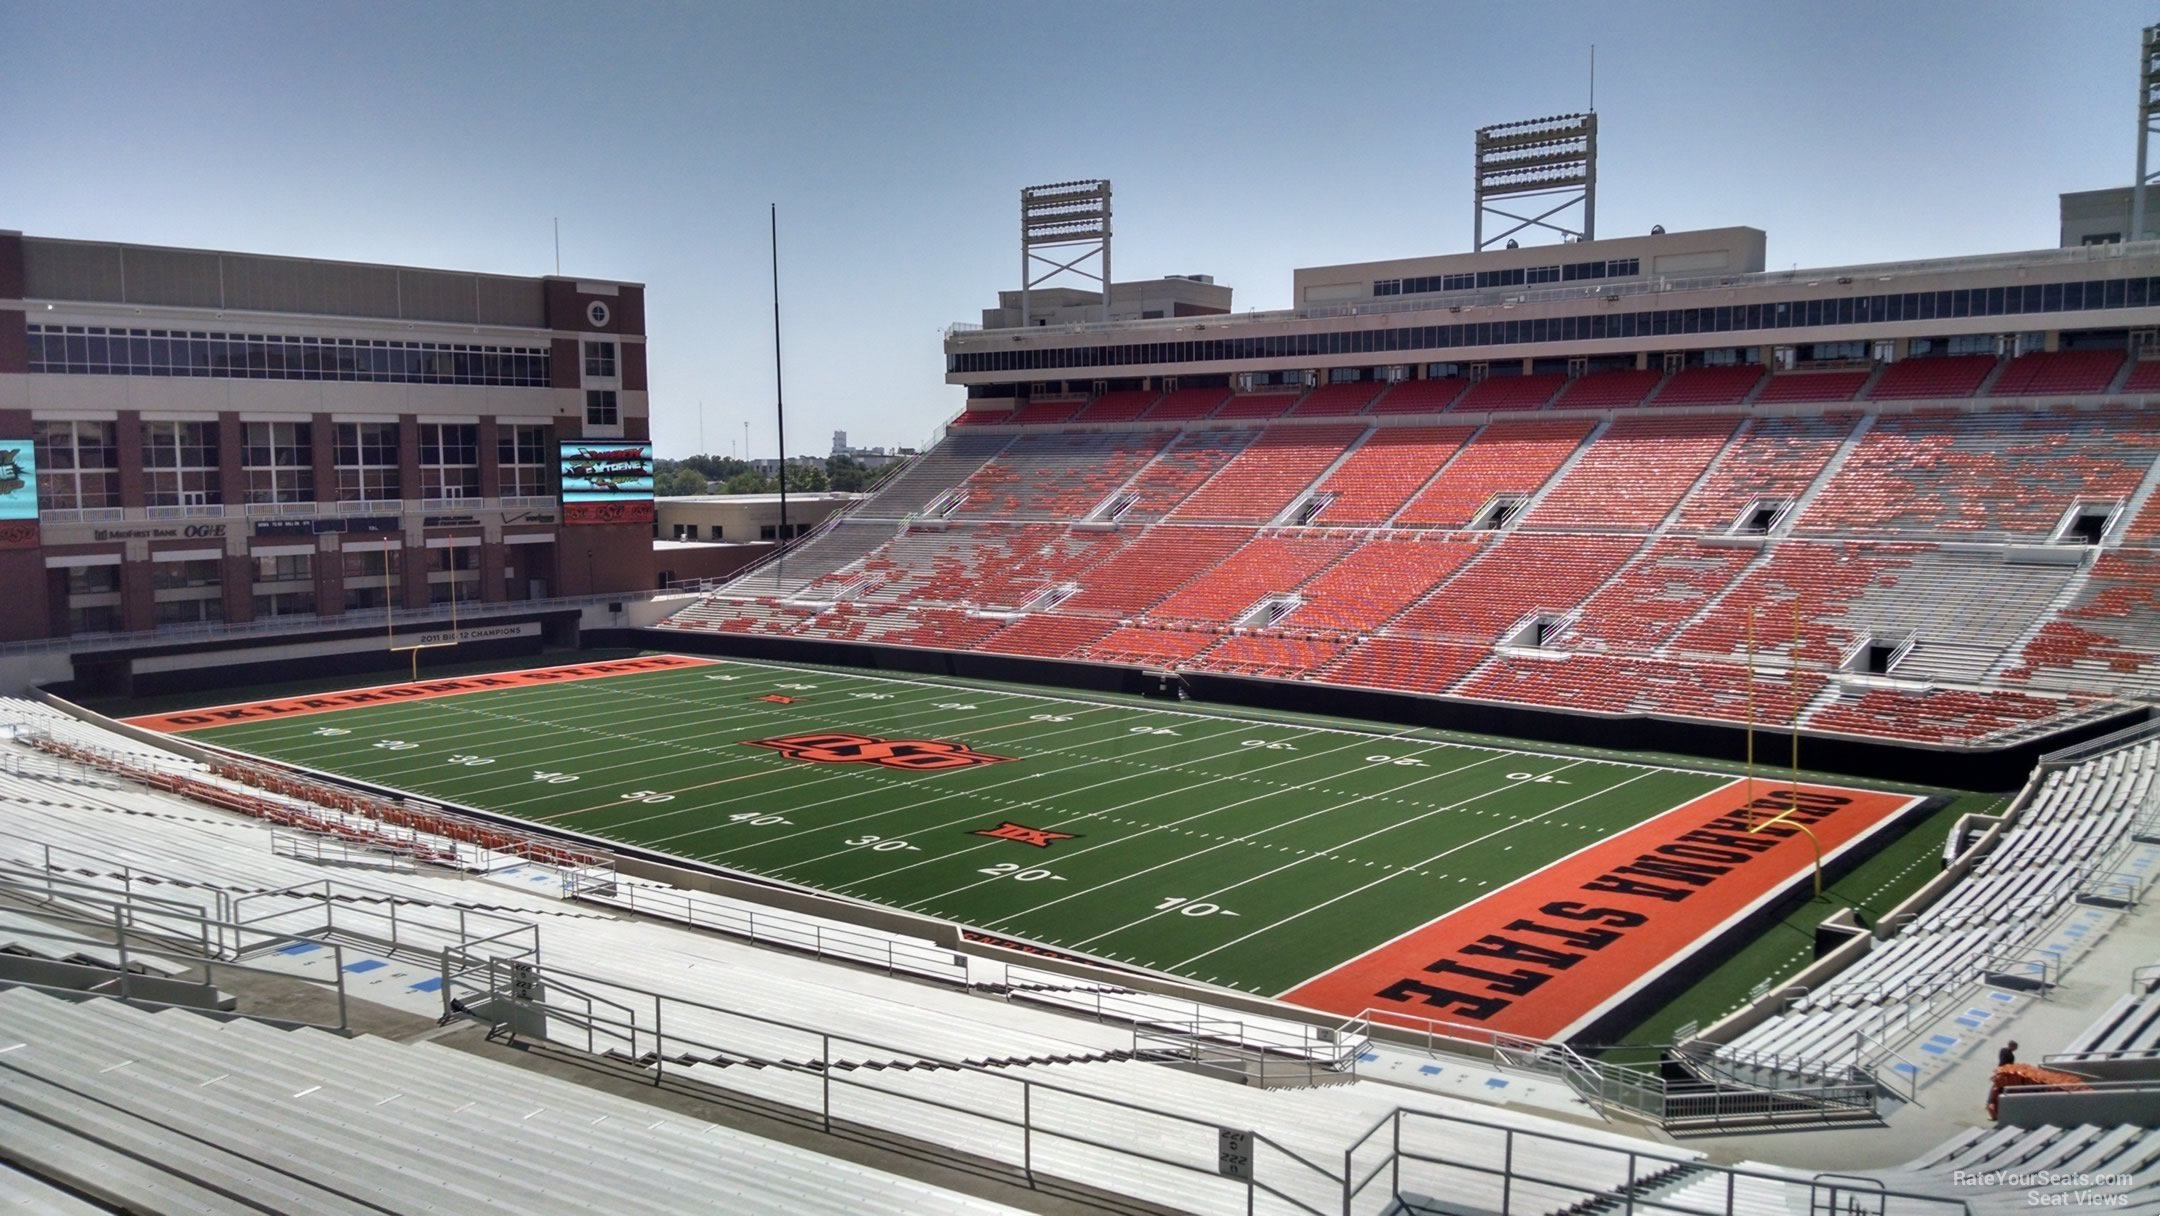 section 327, row 19 seat view  - boone pickens stadium